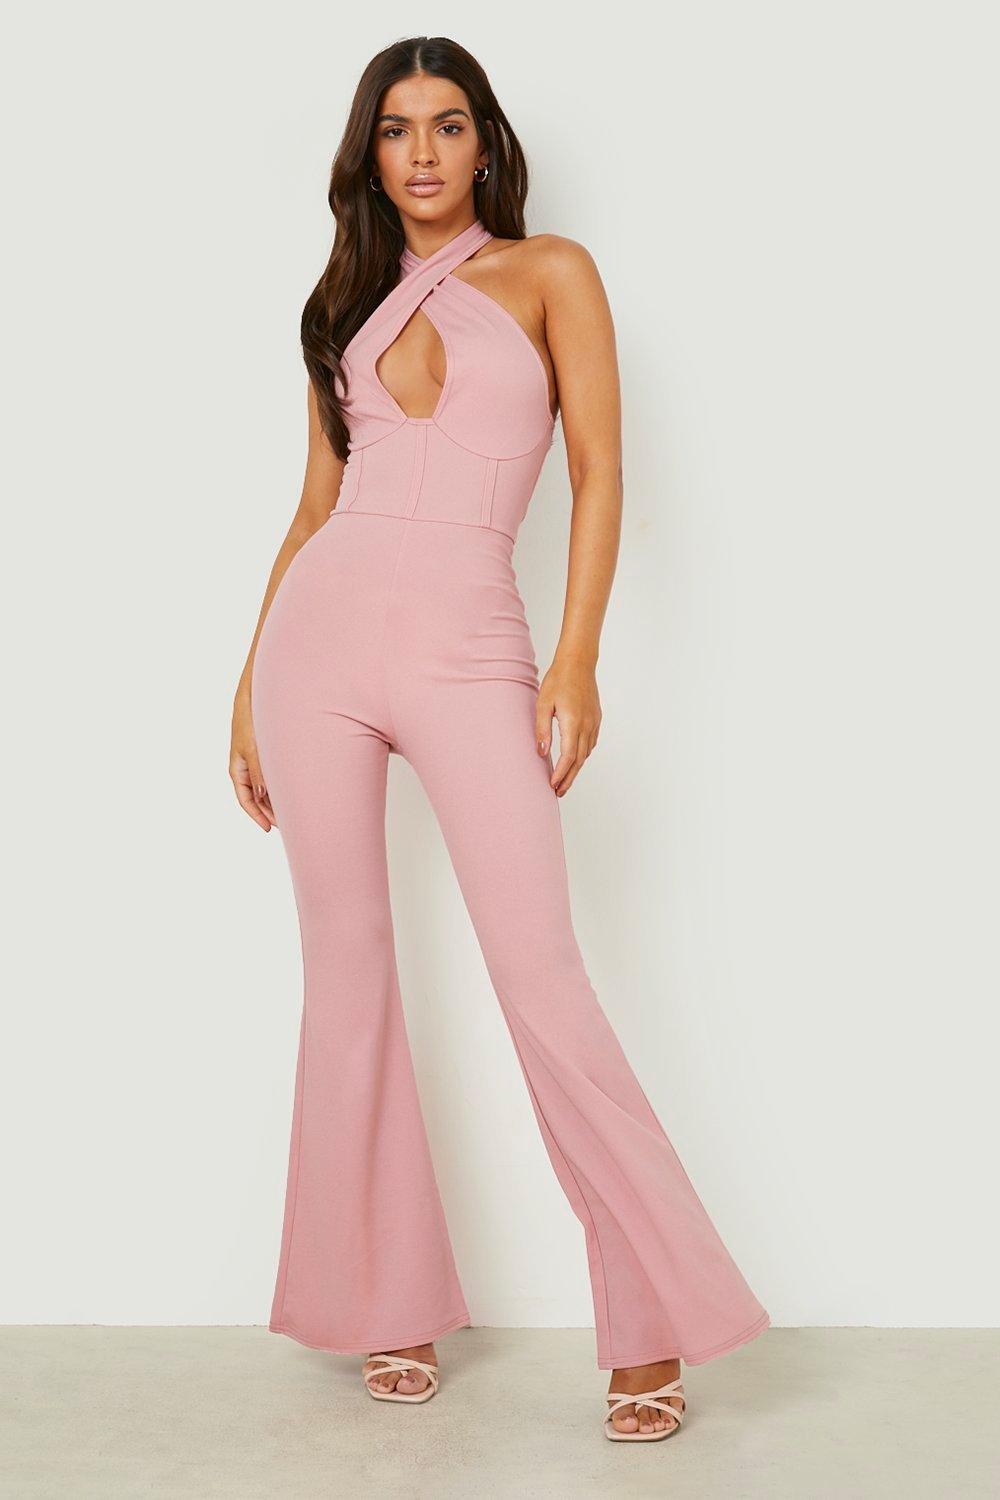 Pink Boohoo Satin Halterneck Panelled Romper in Blush Womens Clothing Jumpsuits and rompers Playsuits 